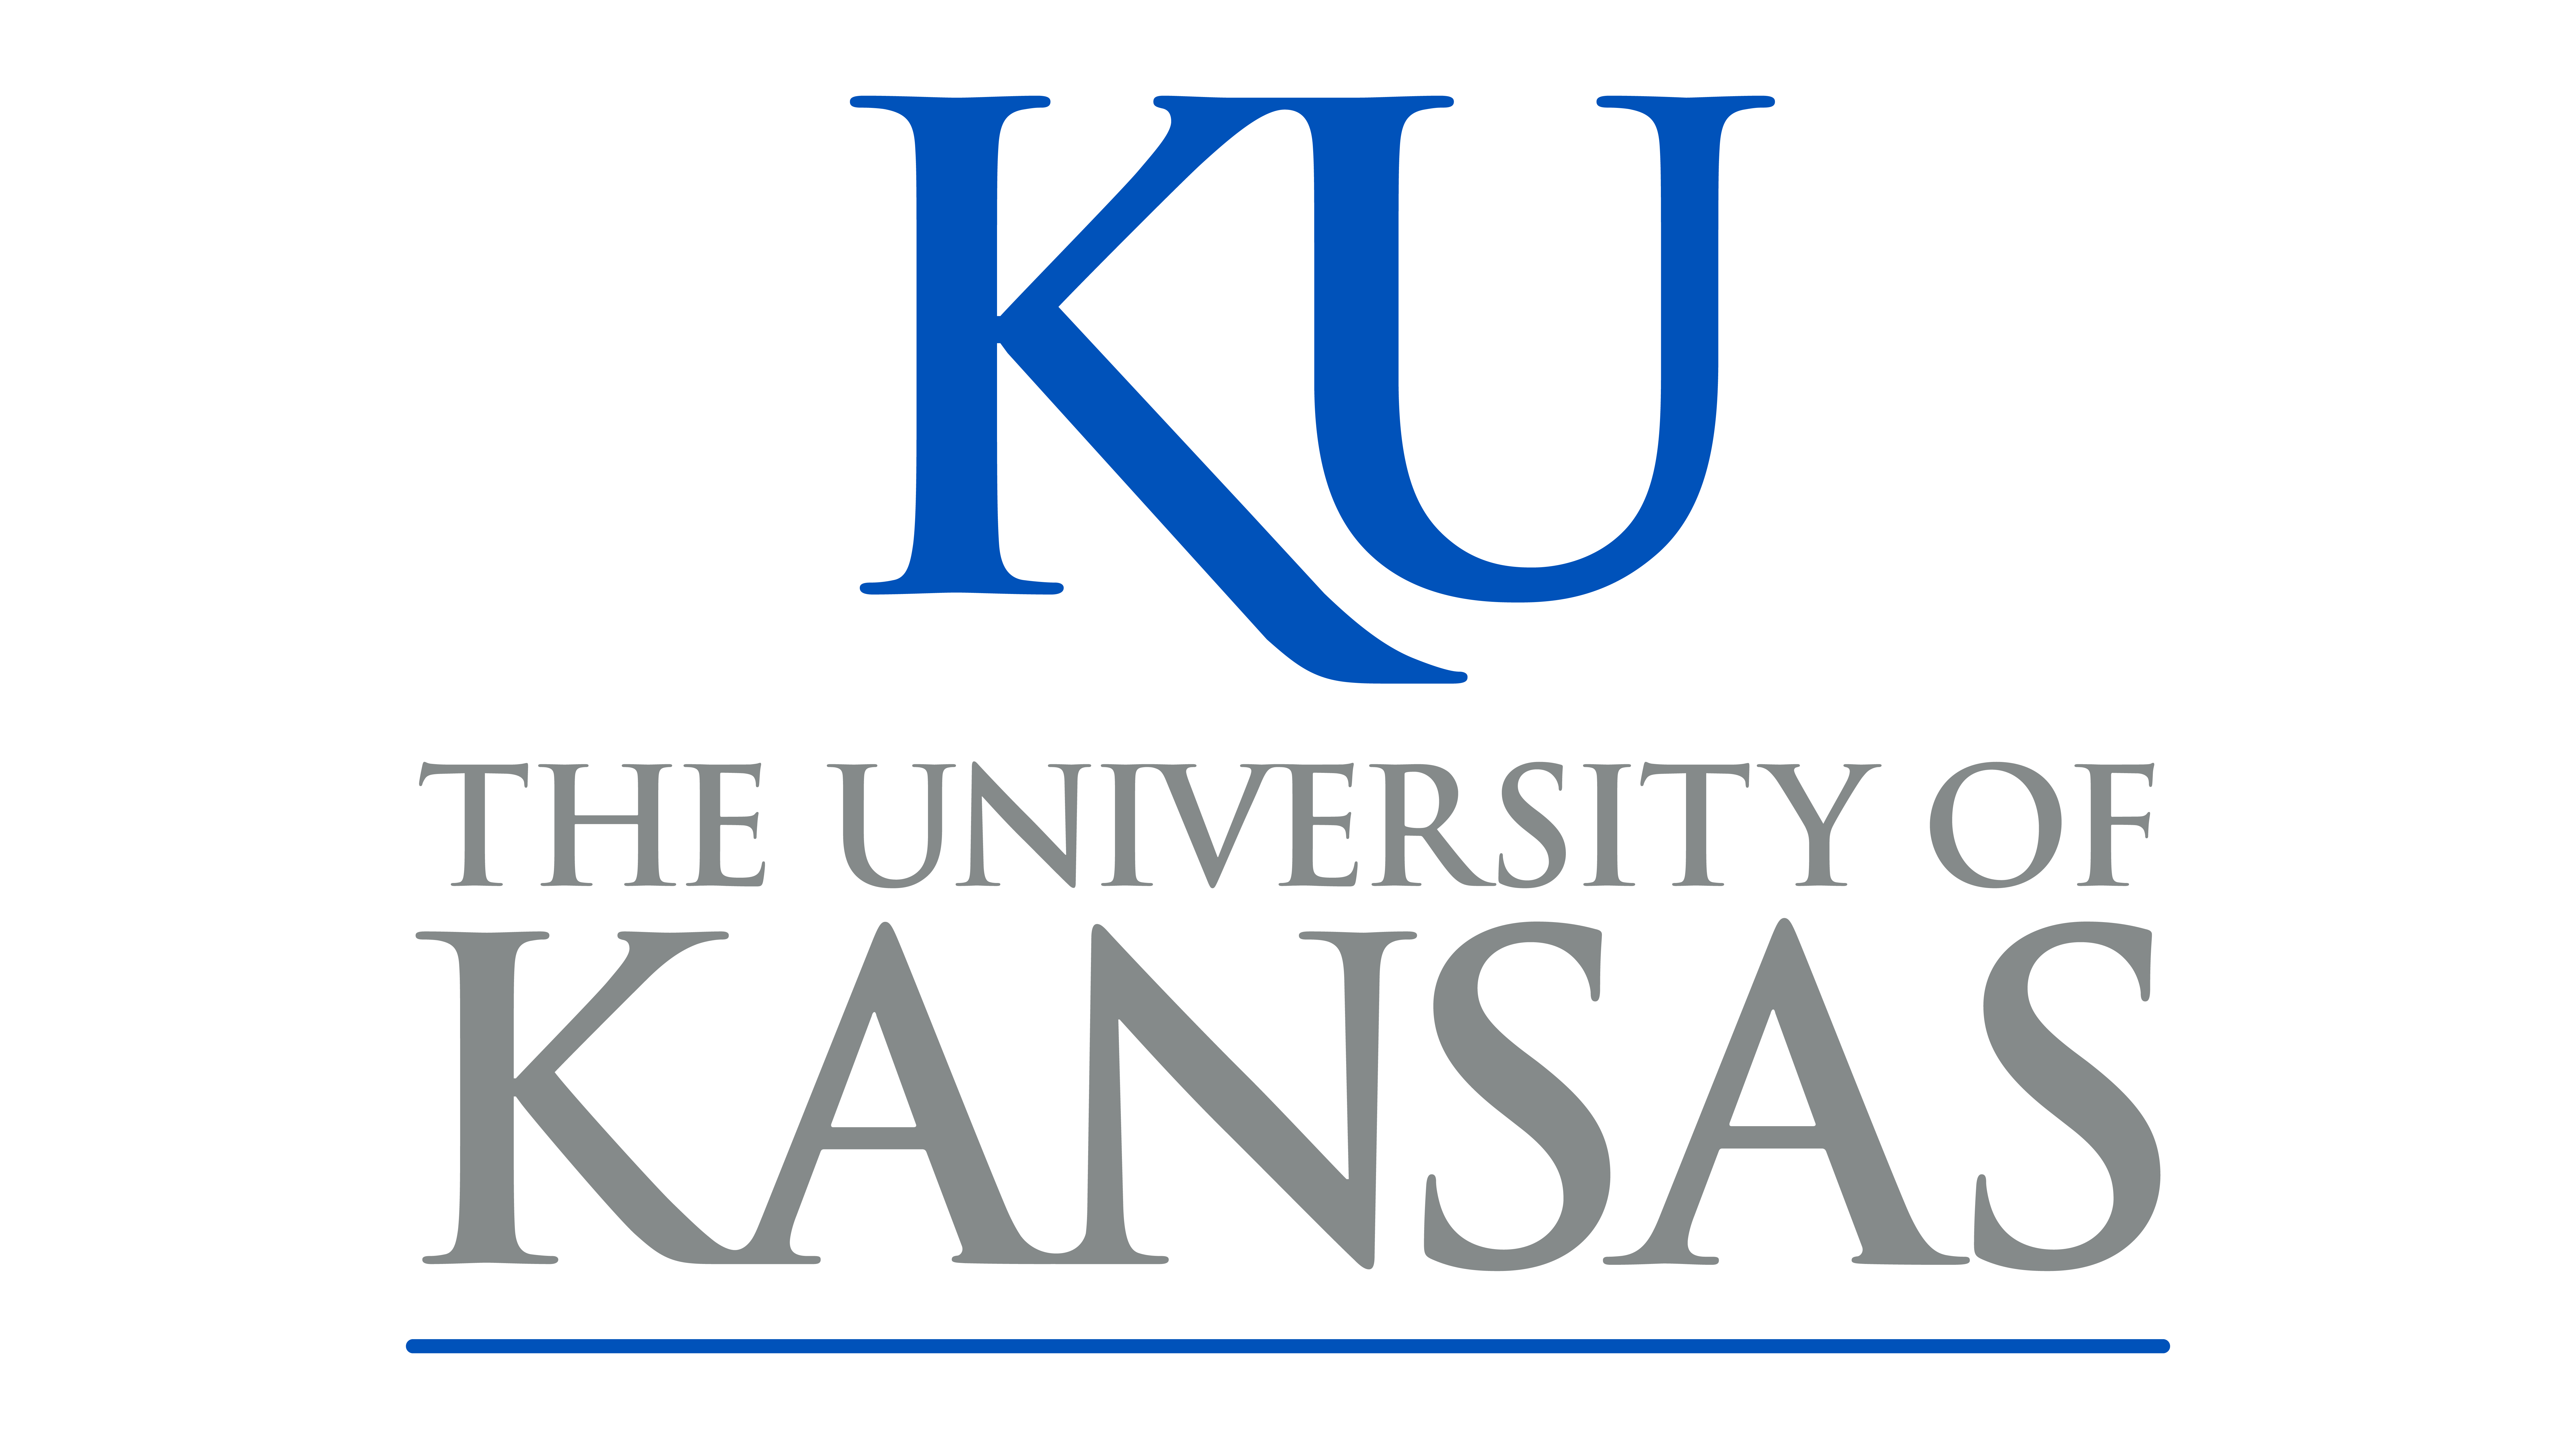 University signature featuring the blue KU logotype on top and grey text underneath it that reads "The University of Kansas"